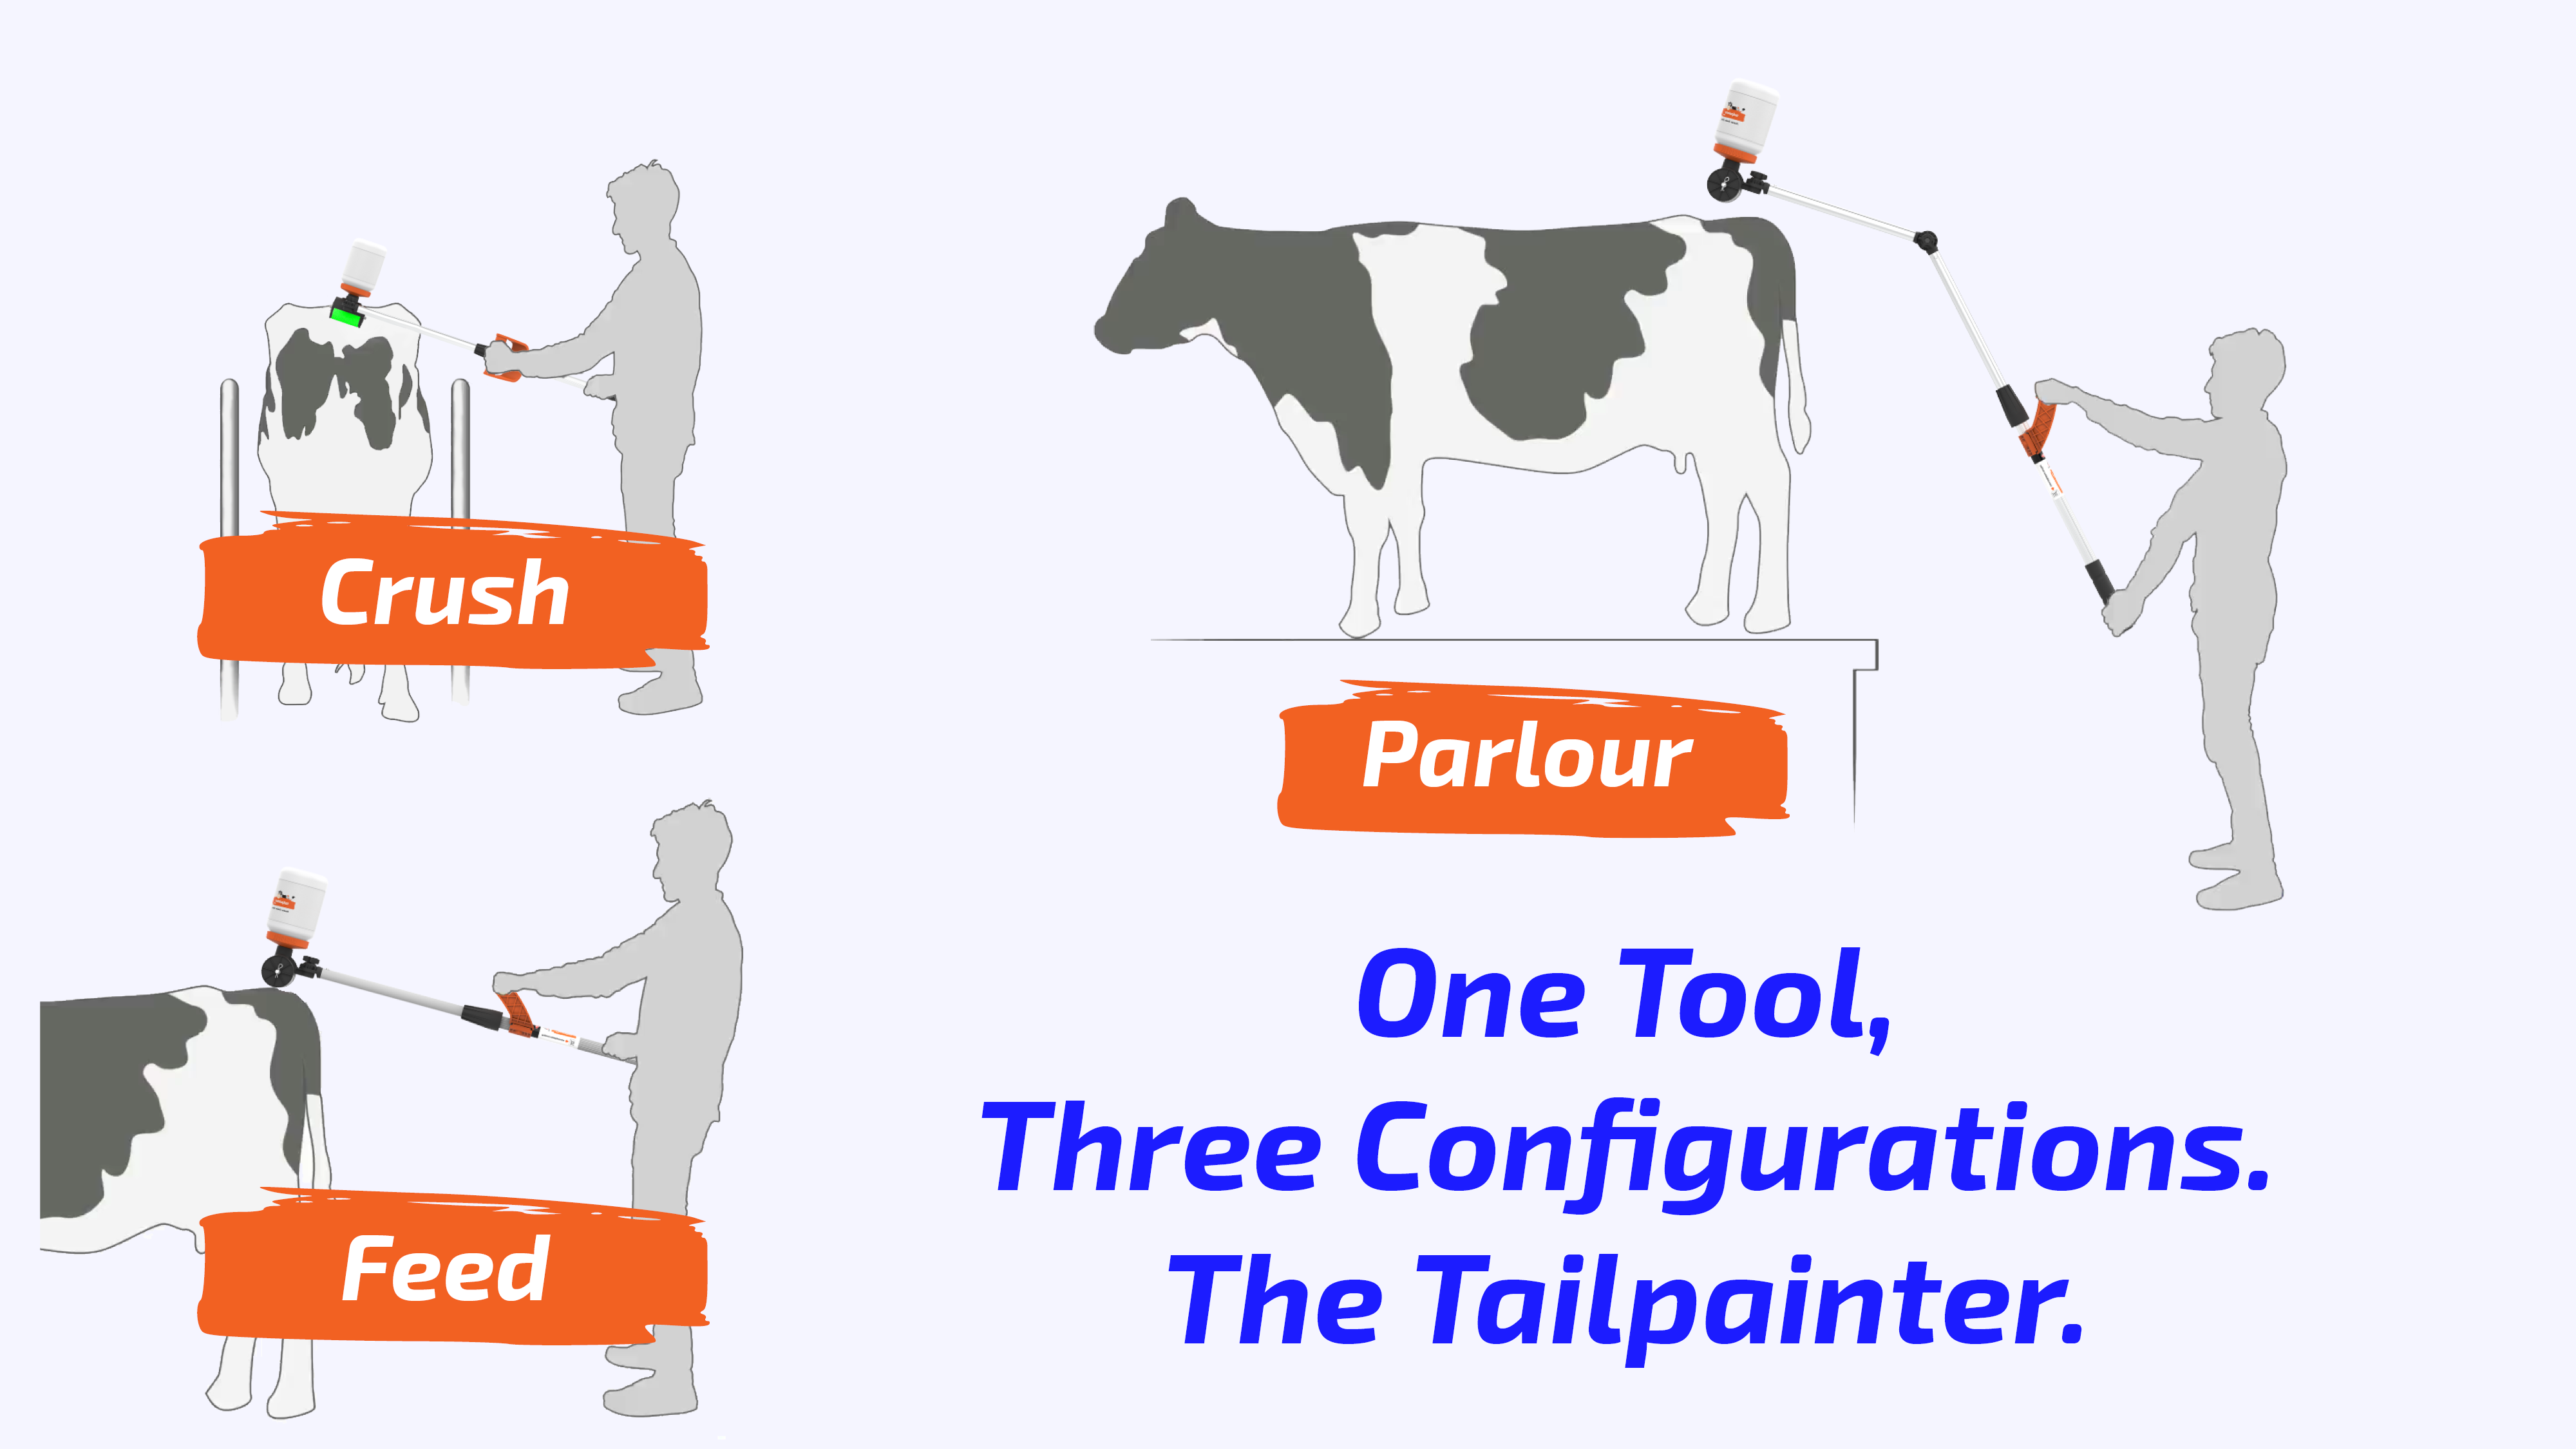 One tool, three configurations, the Tailpainter. Image shows the Tailpainter being used in the three configuration modes: Parlour, Crush, and Feed.